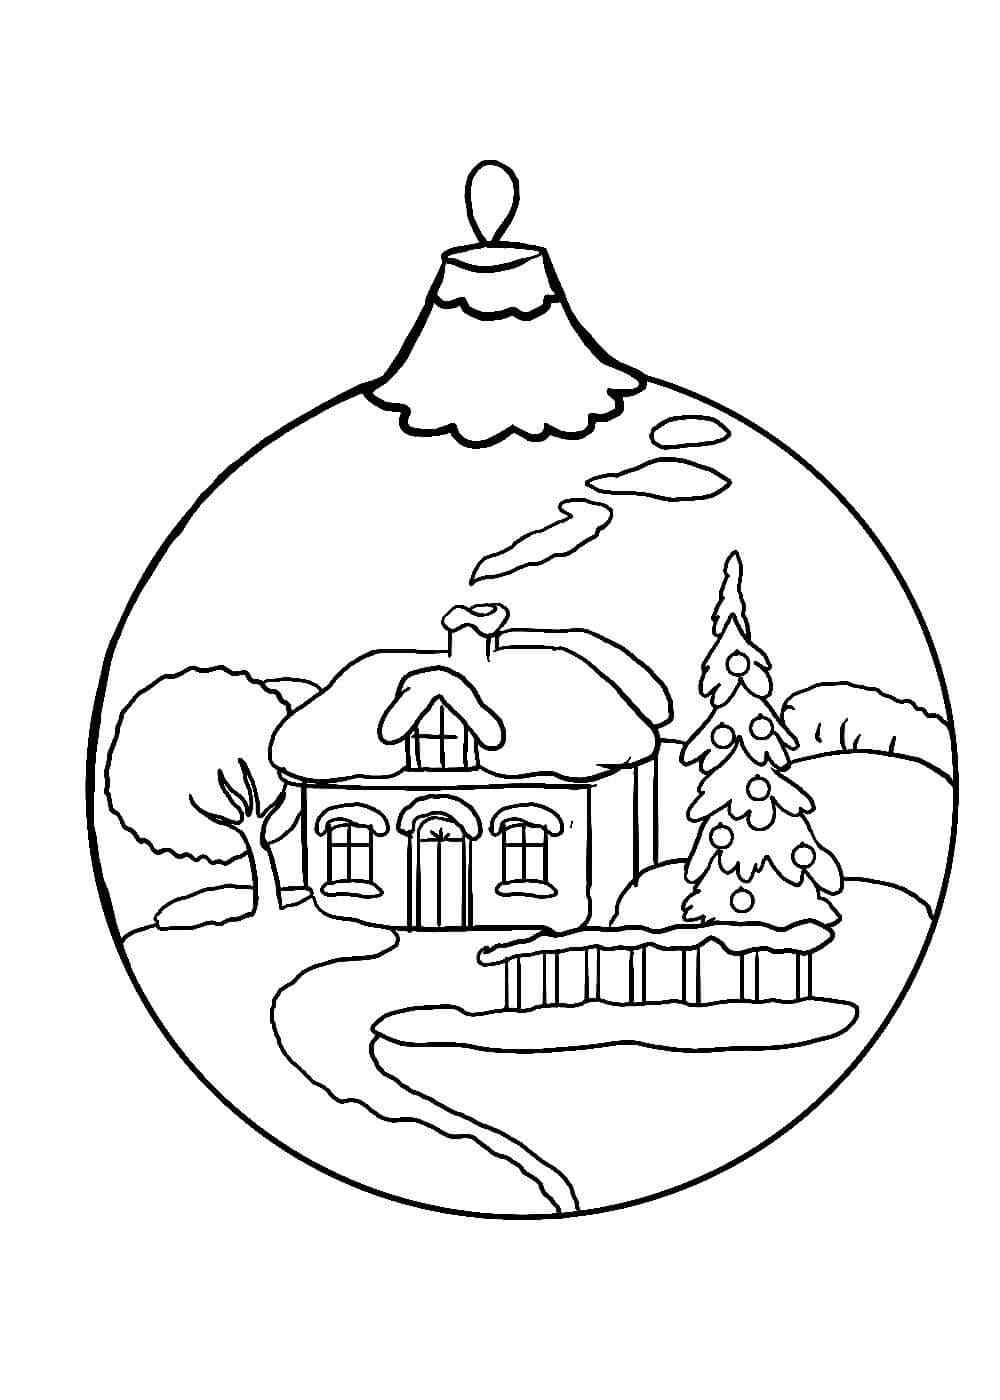 Image Of A Snowy Forest On A Christmas Ball Coloring Page